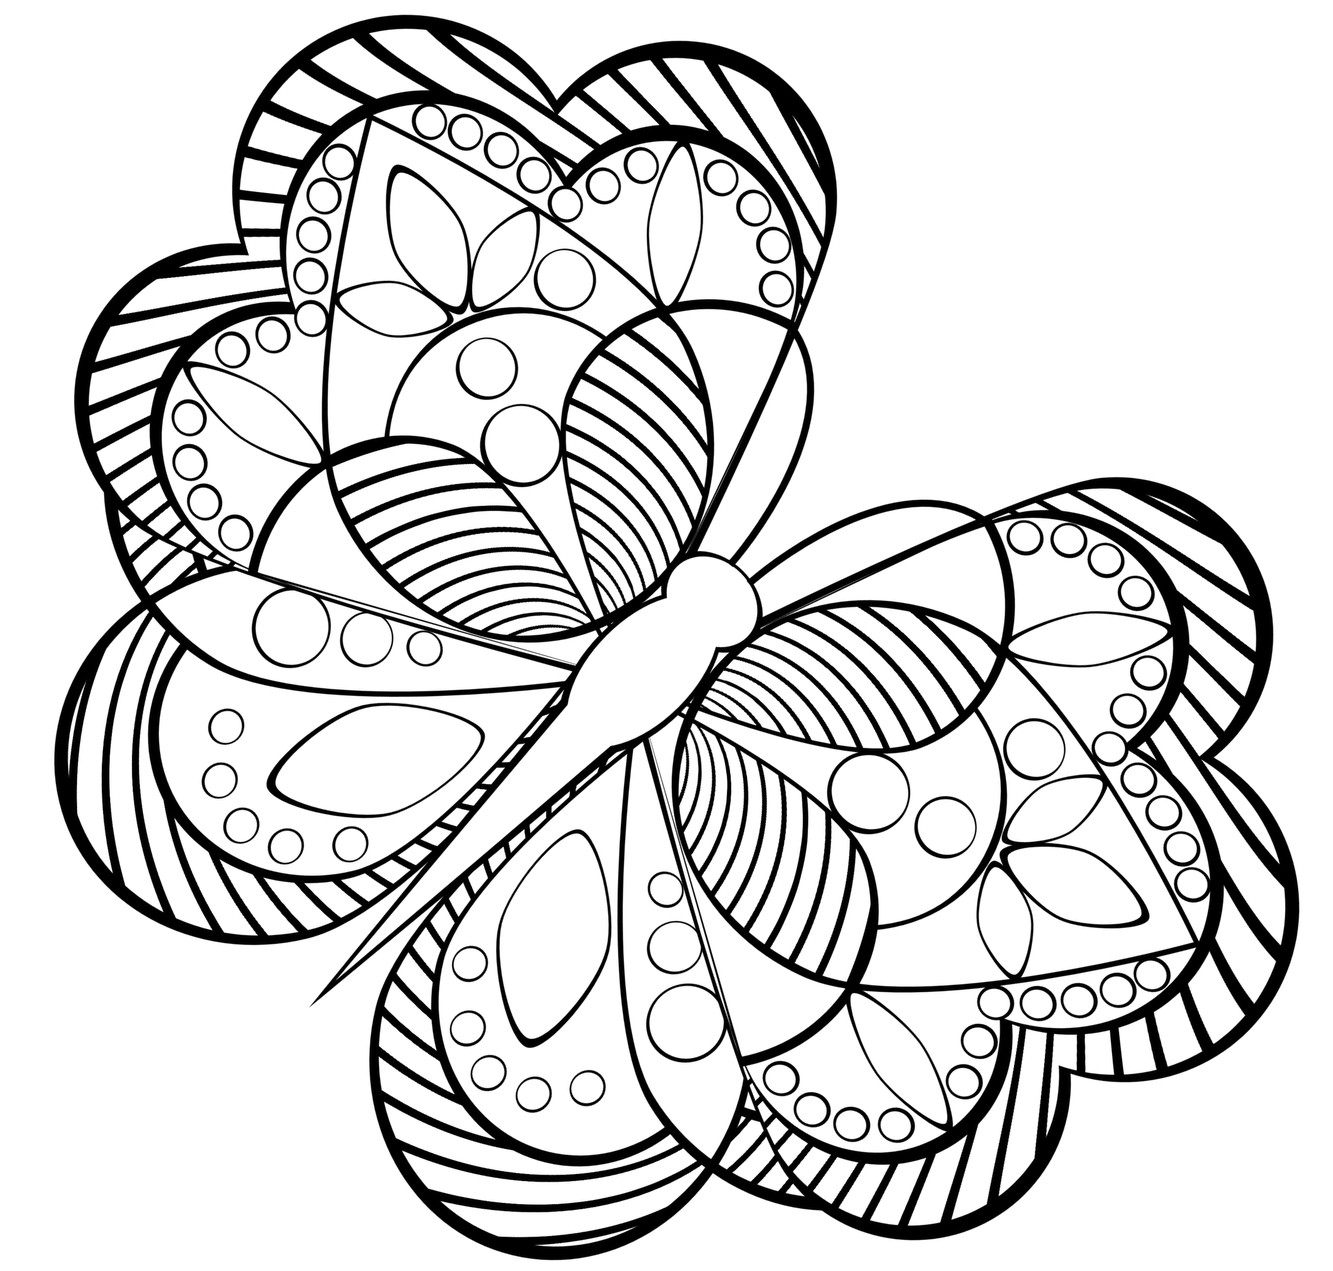 Printable Adult Coloring Pages Free
 Free Coloring Pages For Adults Printable Detailed Image 23